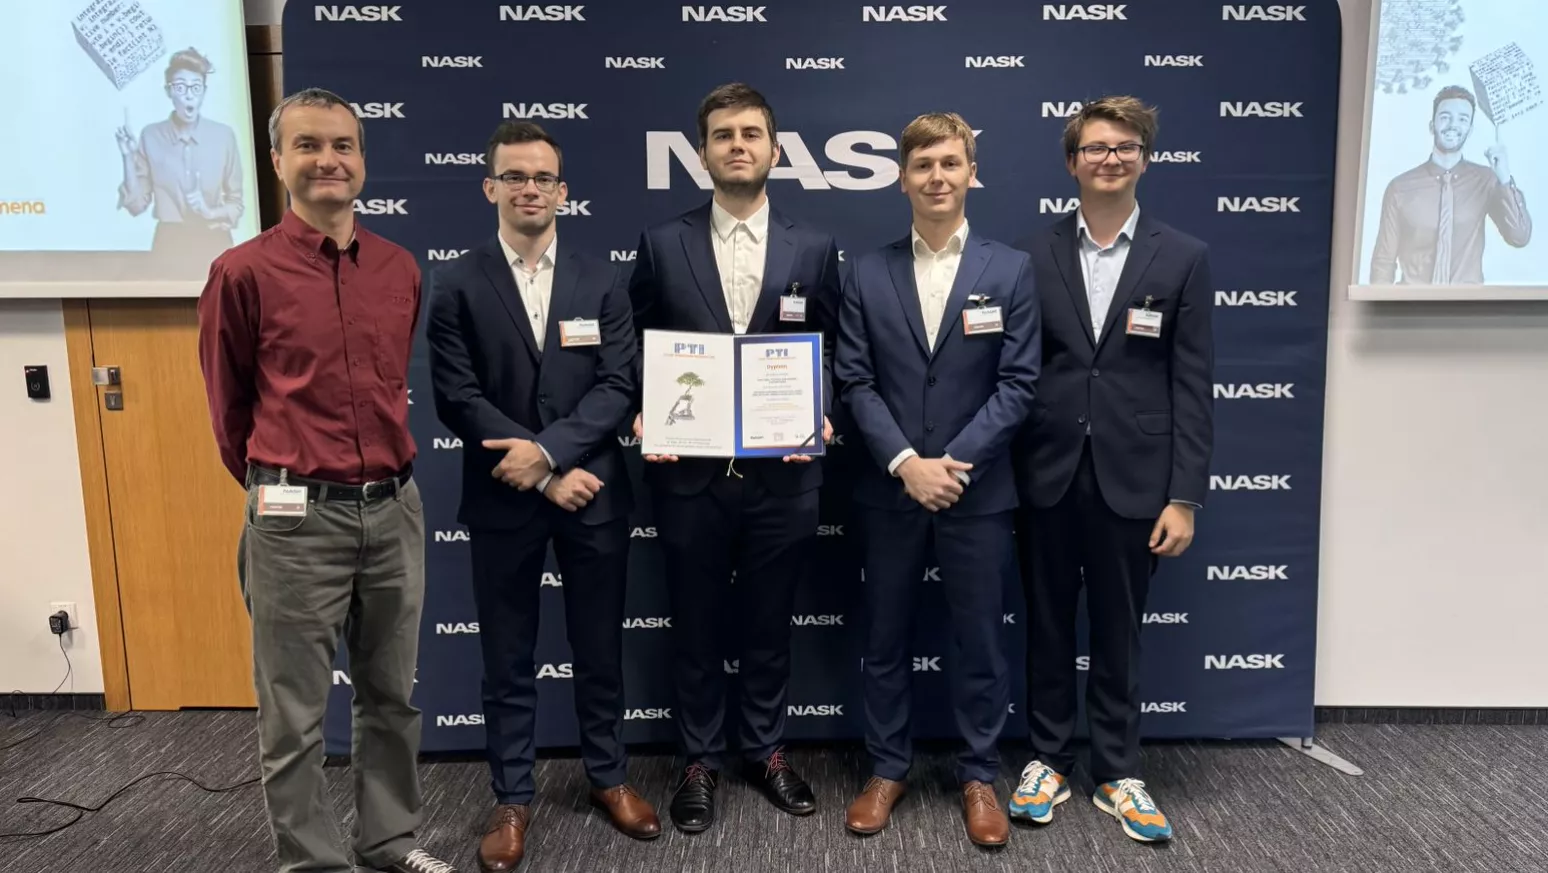 First award at the III National Competition of the Polish Information Technology Society